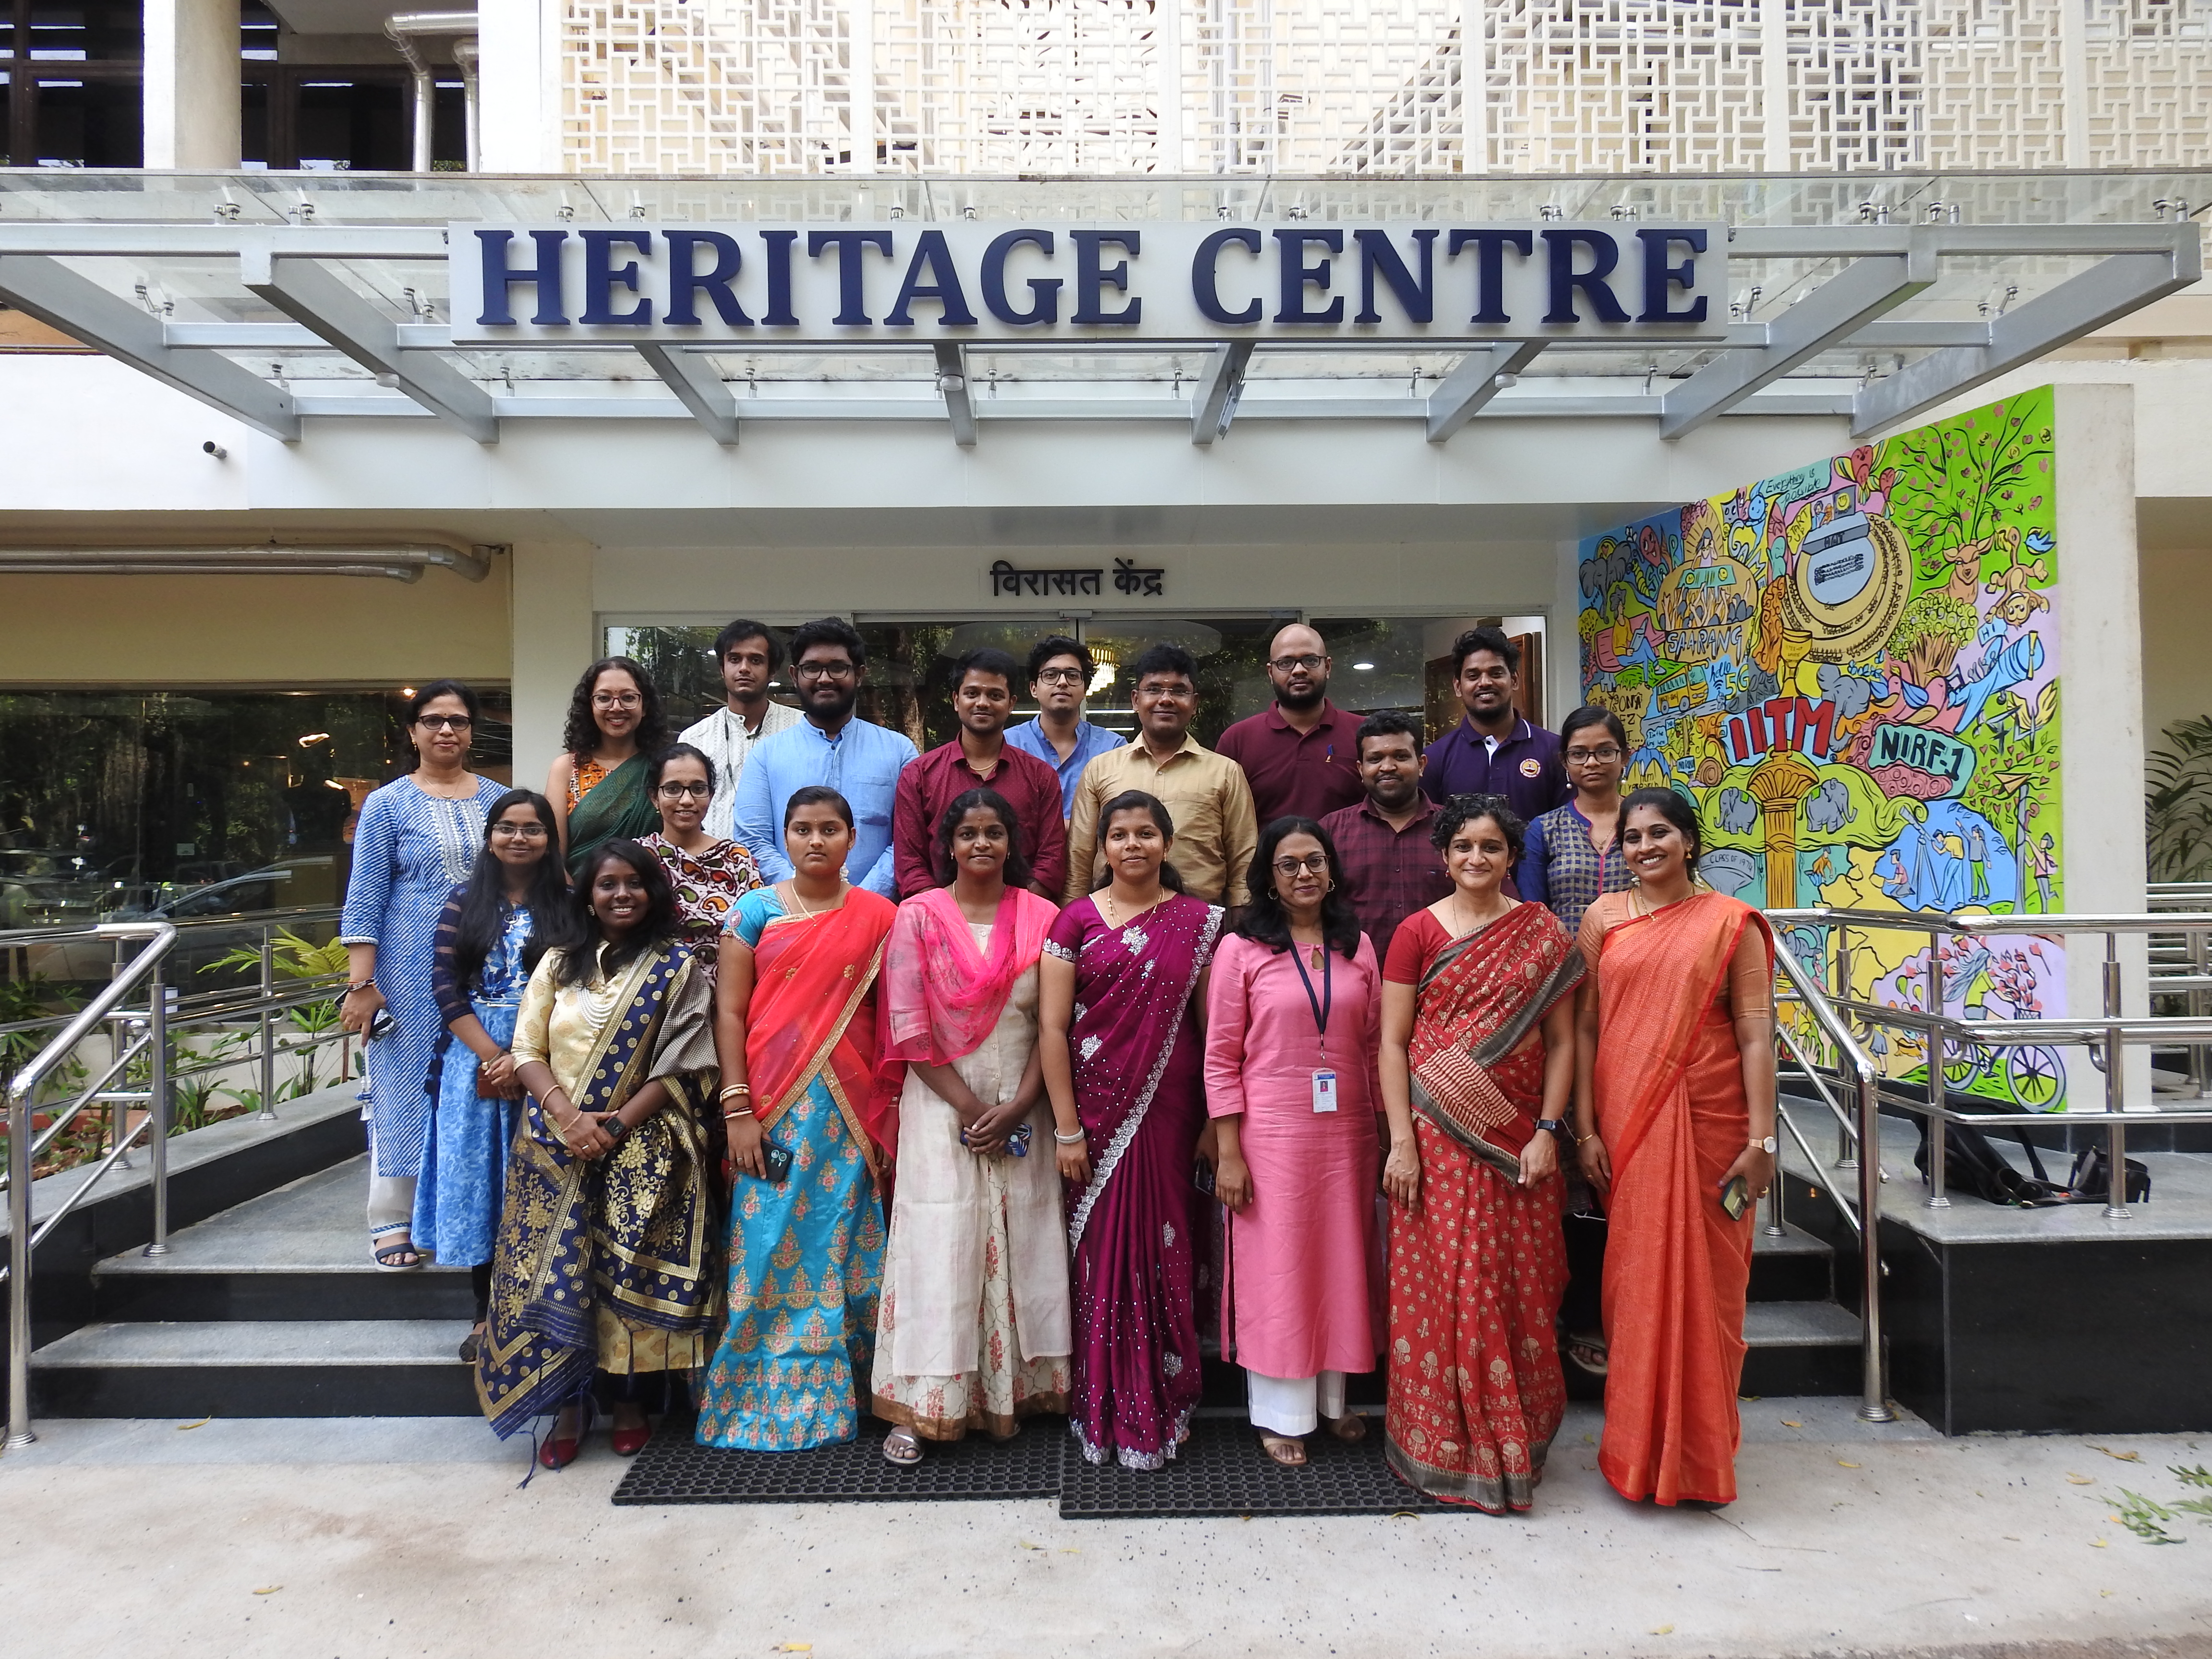 A group photograph outside the Heritage Centre